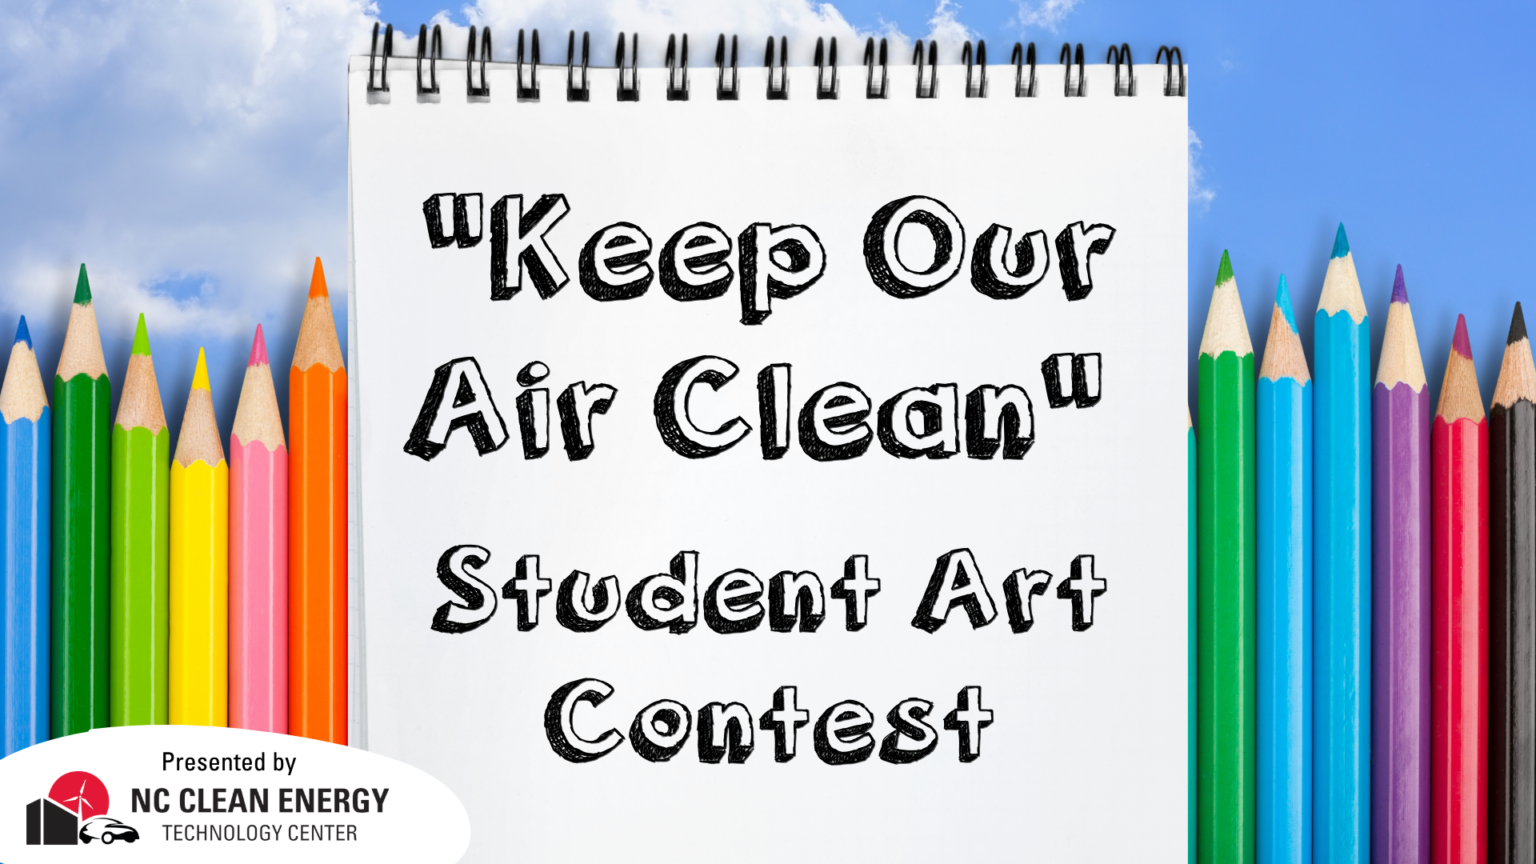 Submit Your Artwork for the 2023 “Keep Our Air Clean” Student Art